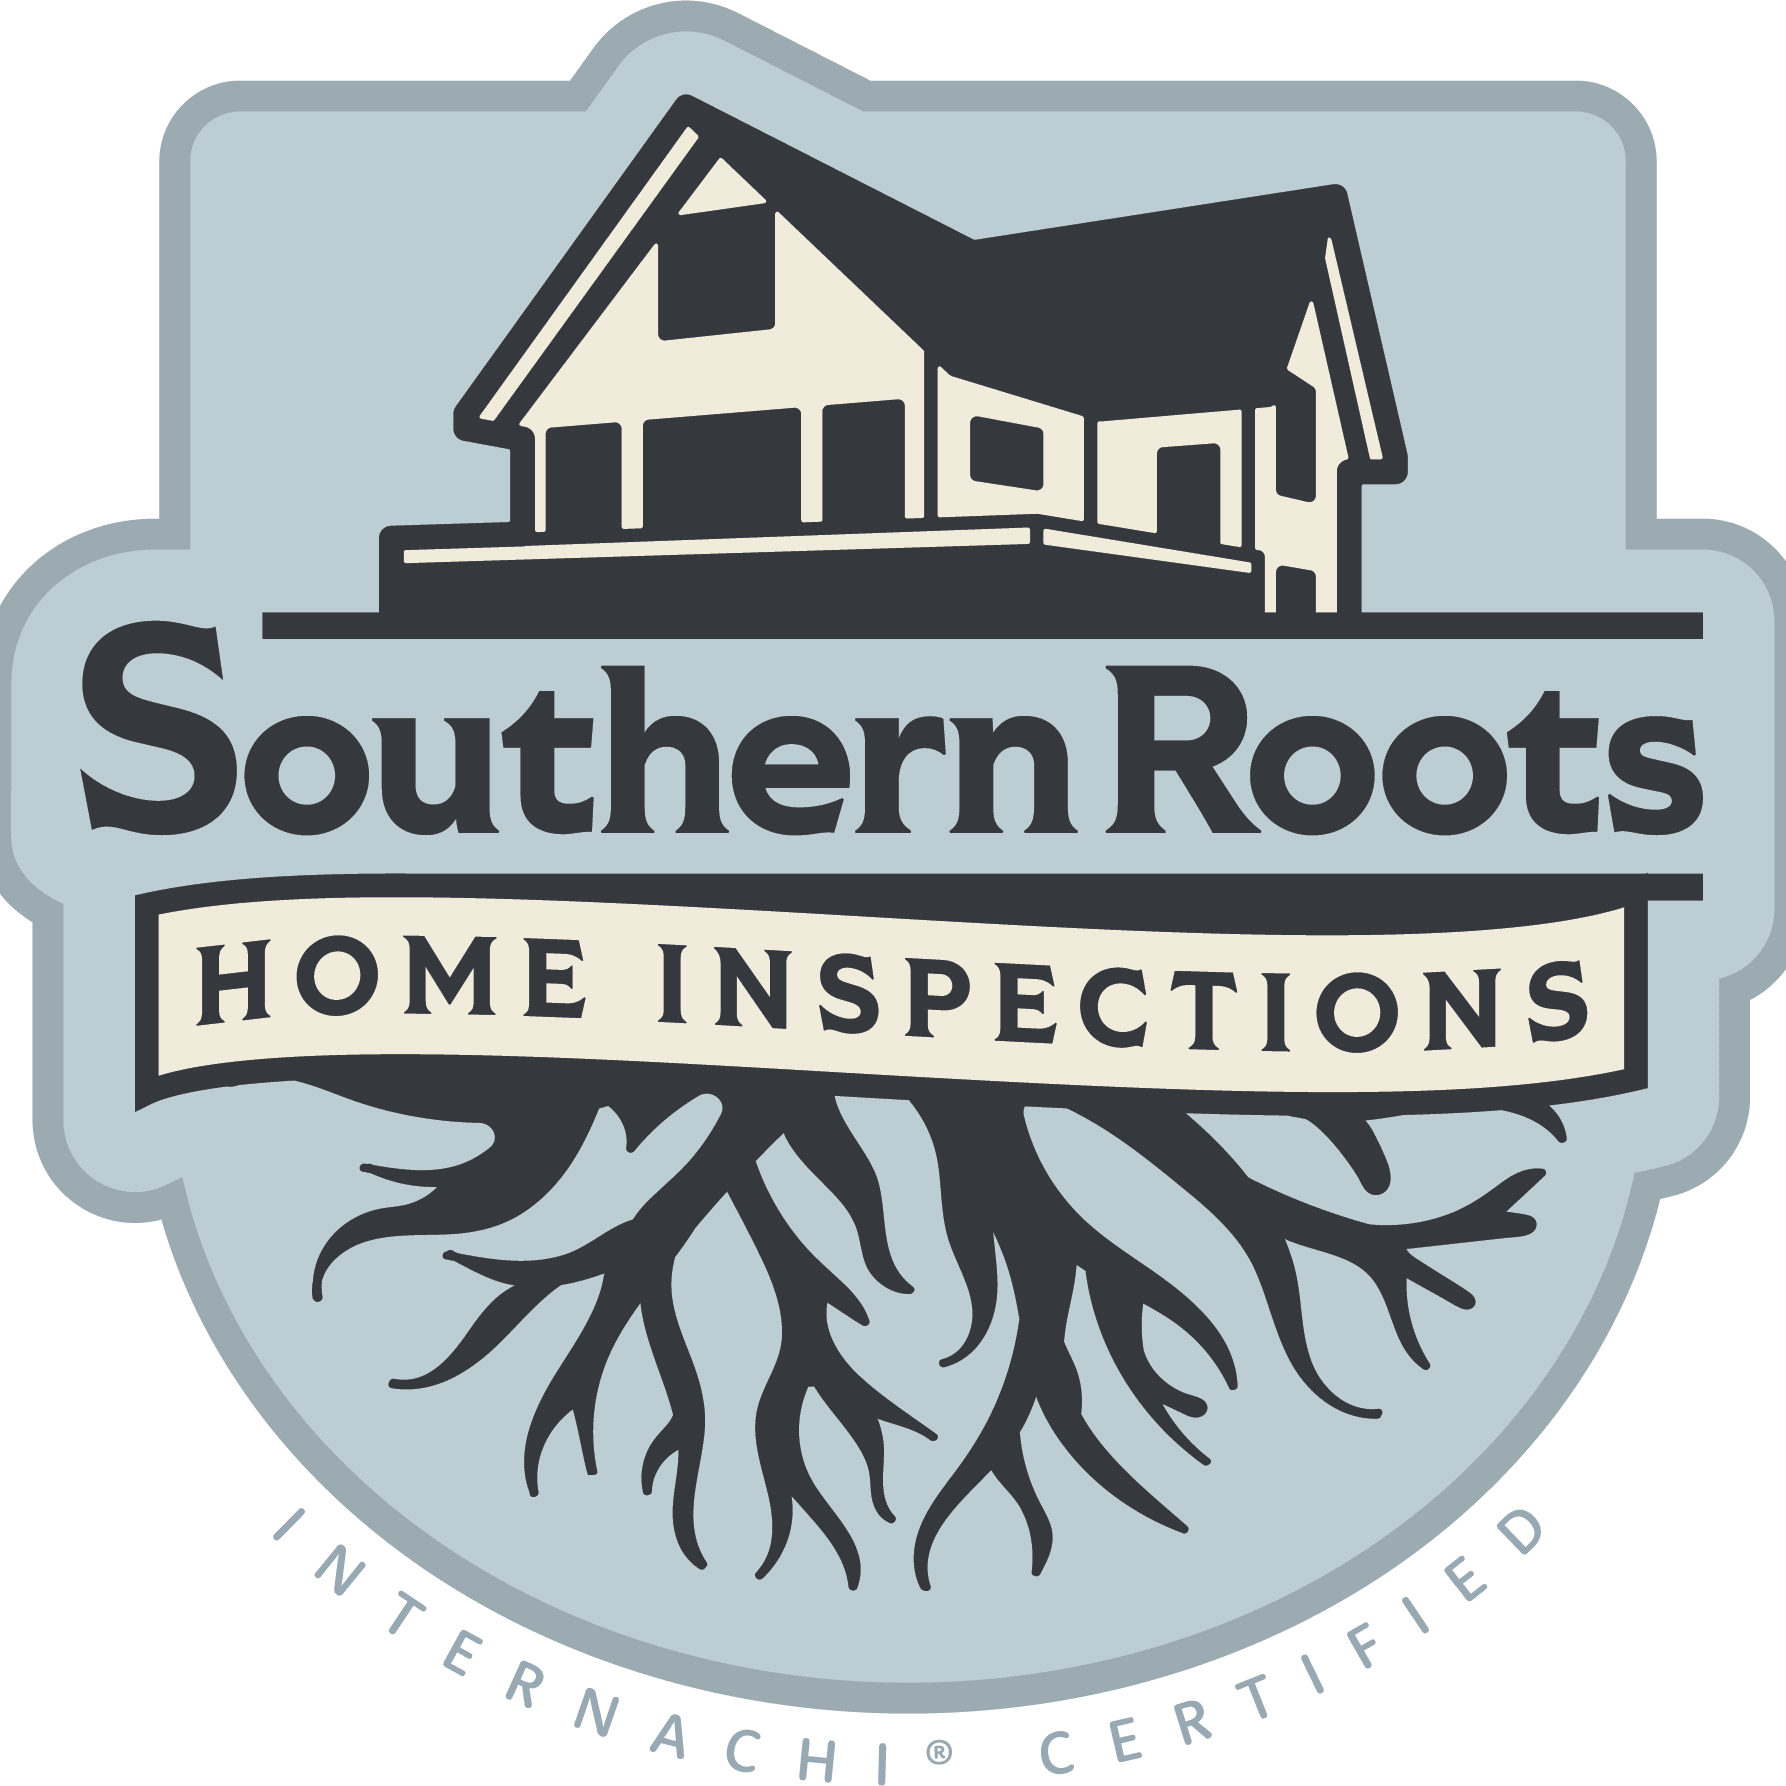 Southern Roots Home Inspections Logo